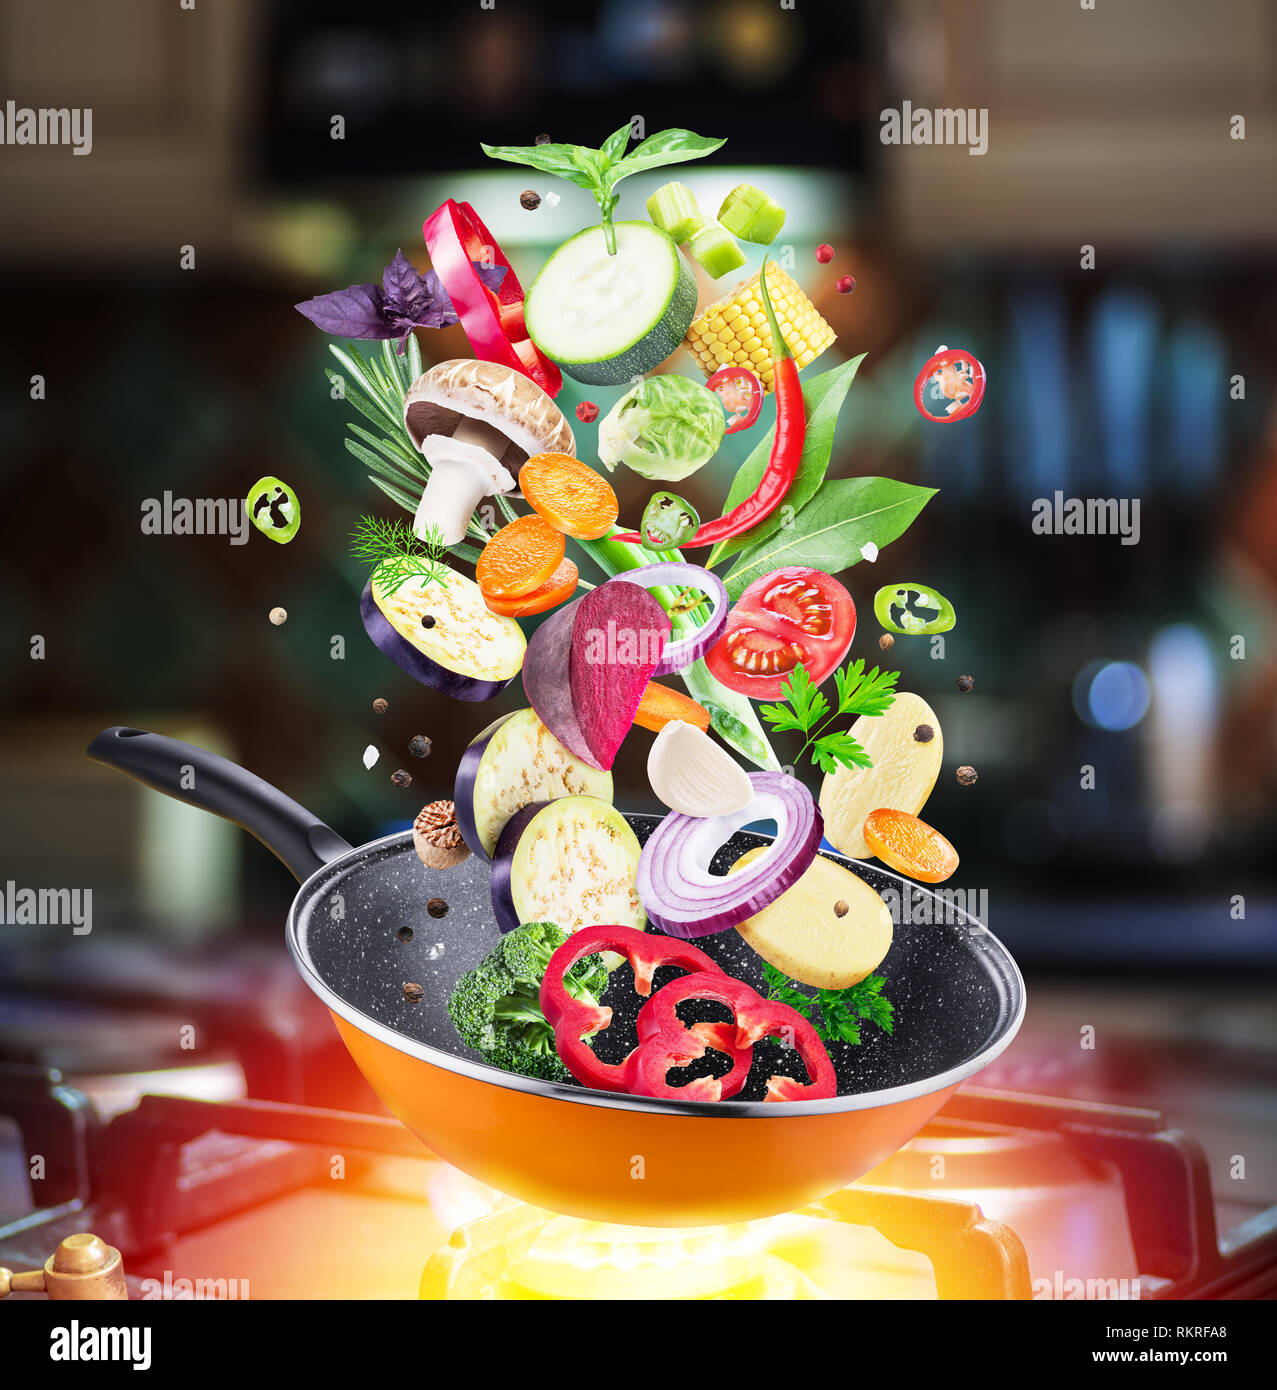 Flying fresh vegetables and spices falling into a pan. Flying motion effect.Gas-stove at the background. Stock Photo